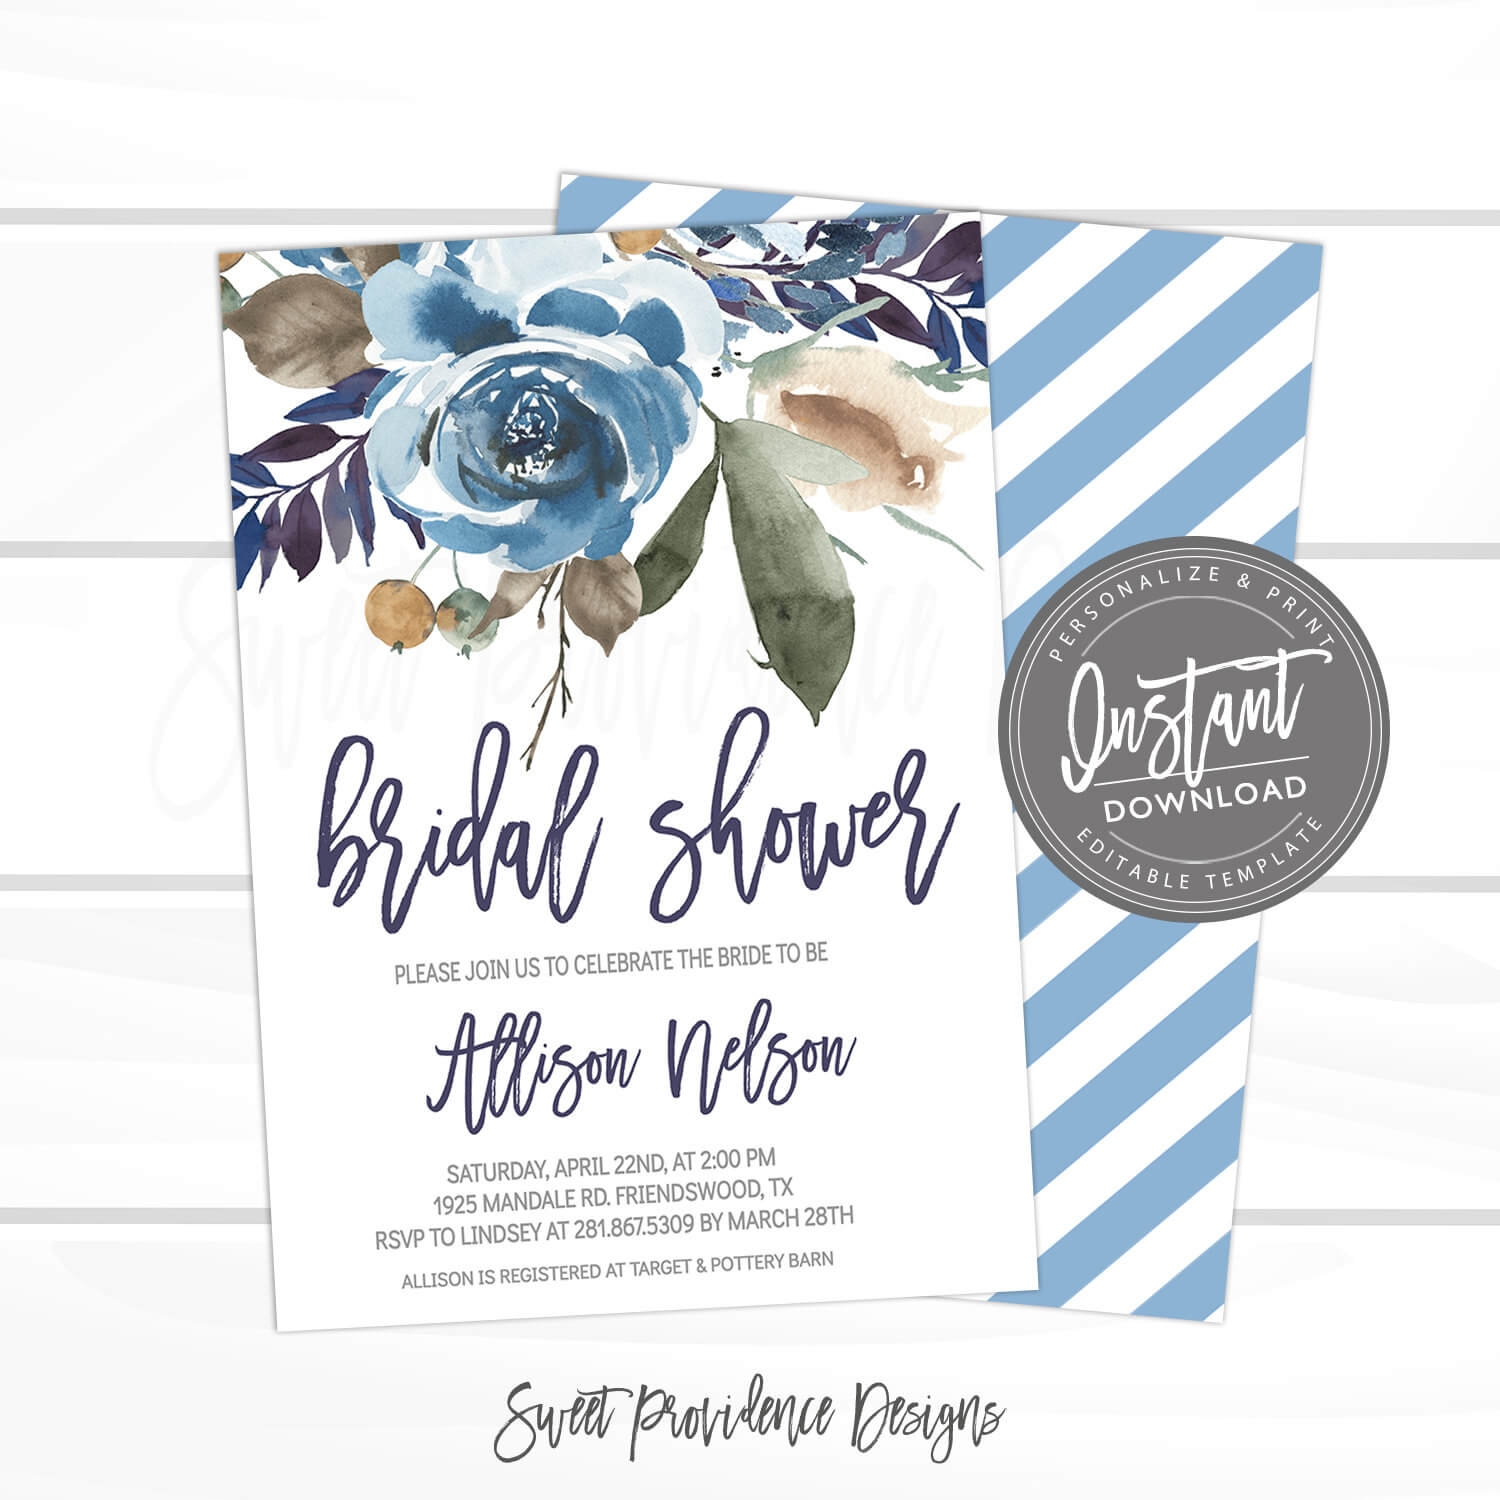 Floral Bridal Shower Invitation Template With Bridal Shower Invite Template